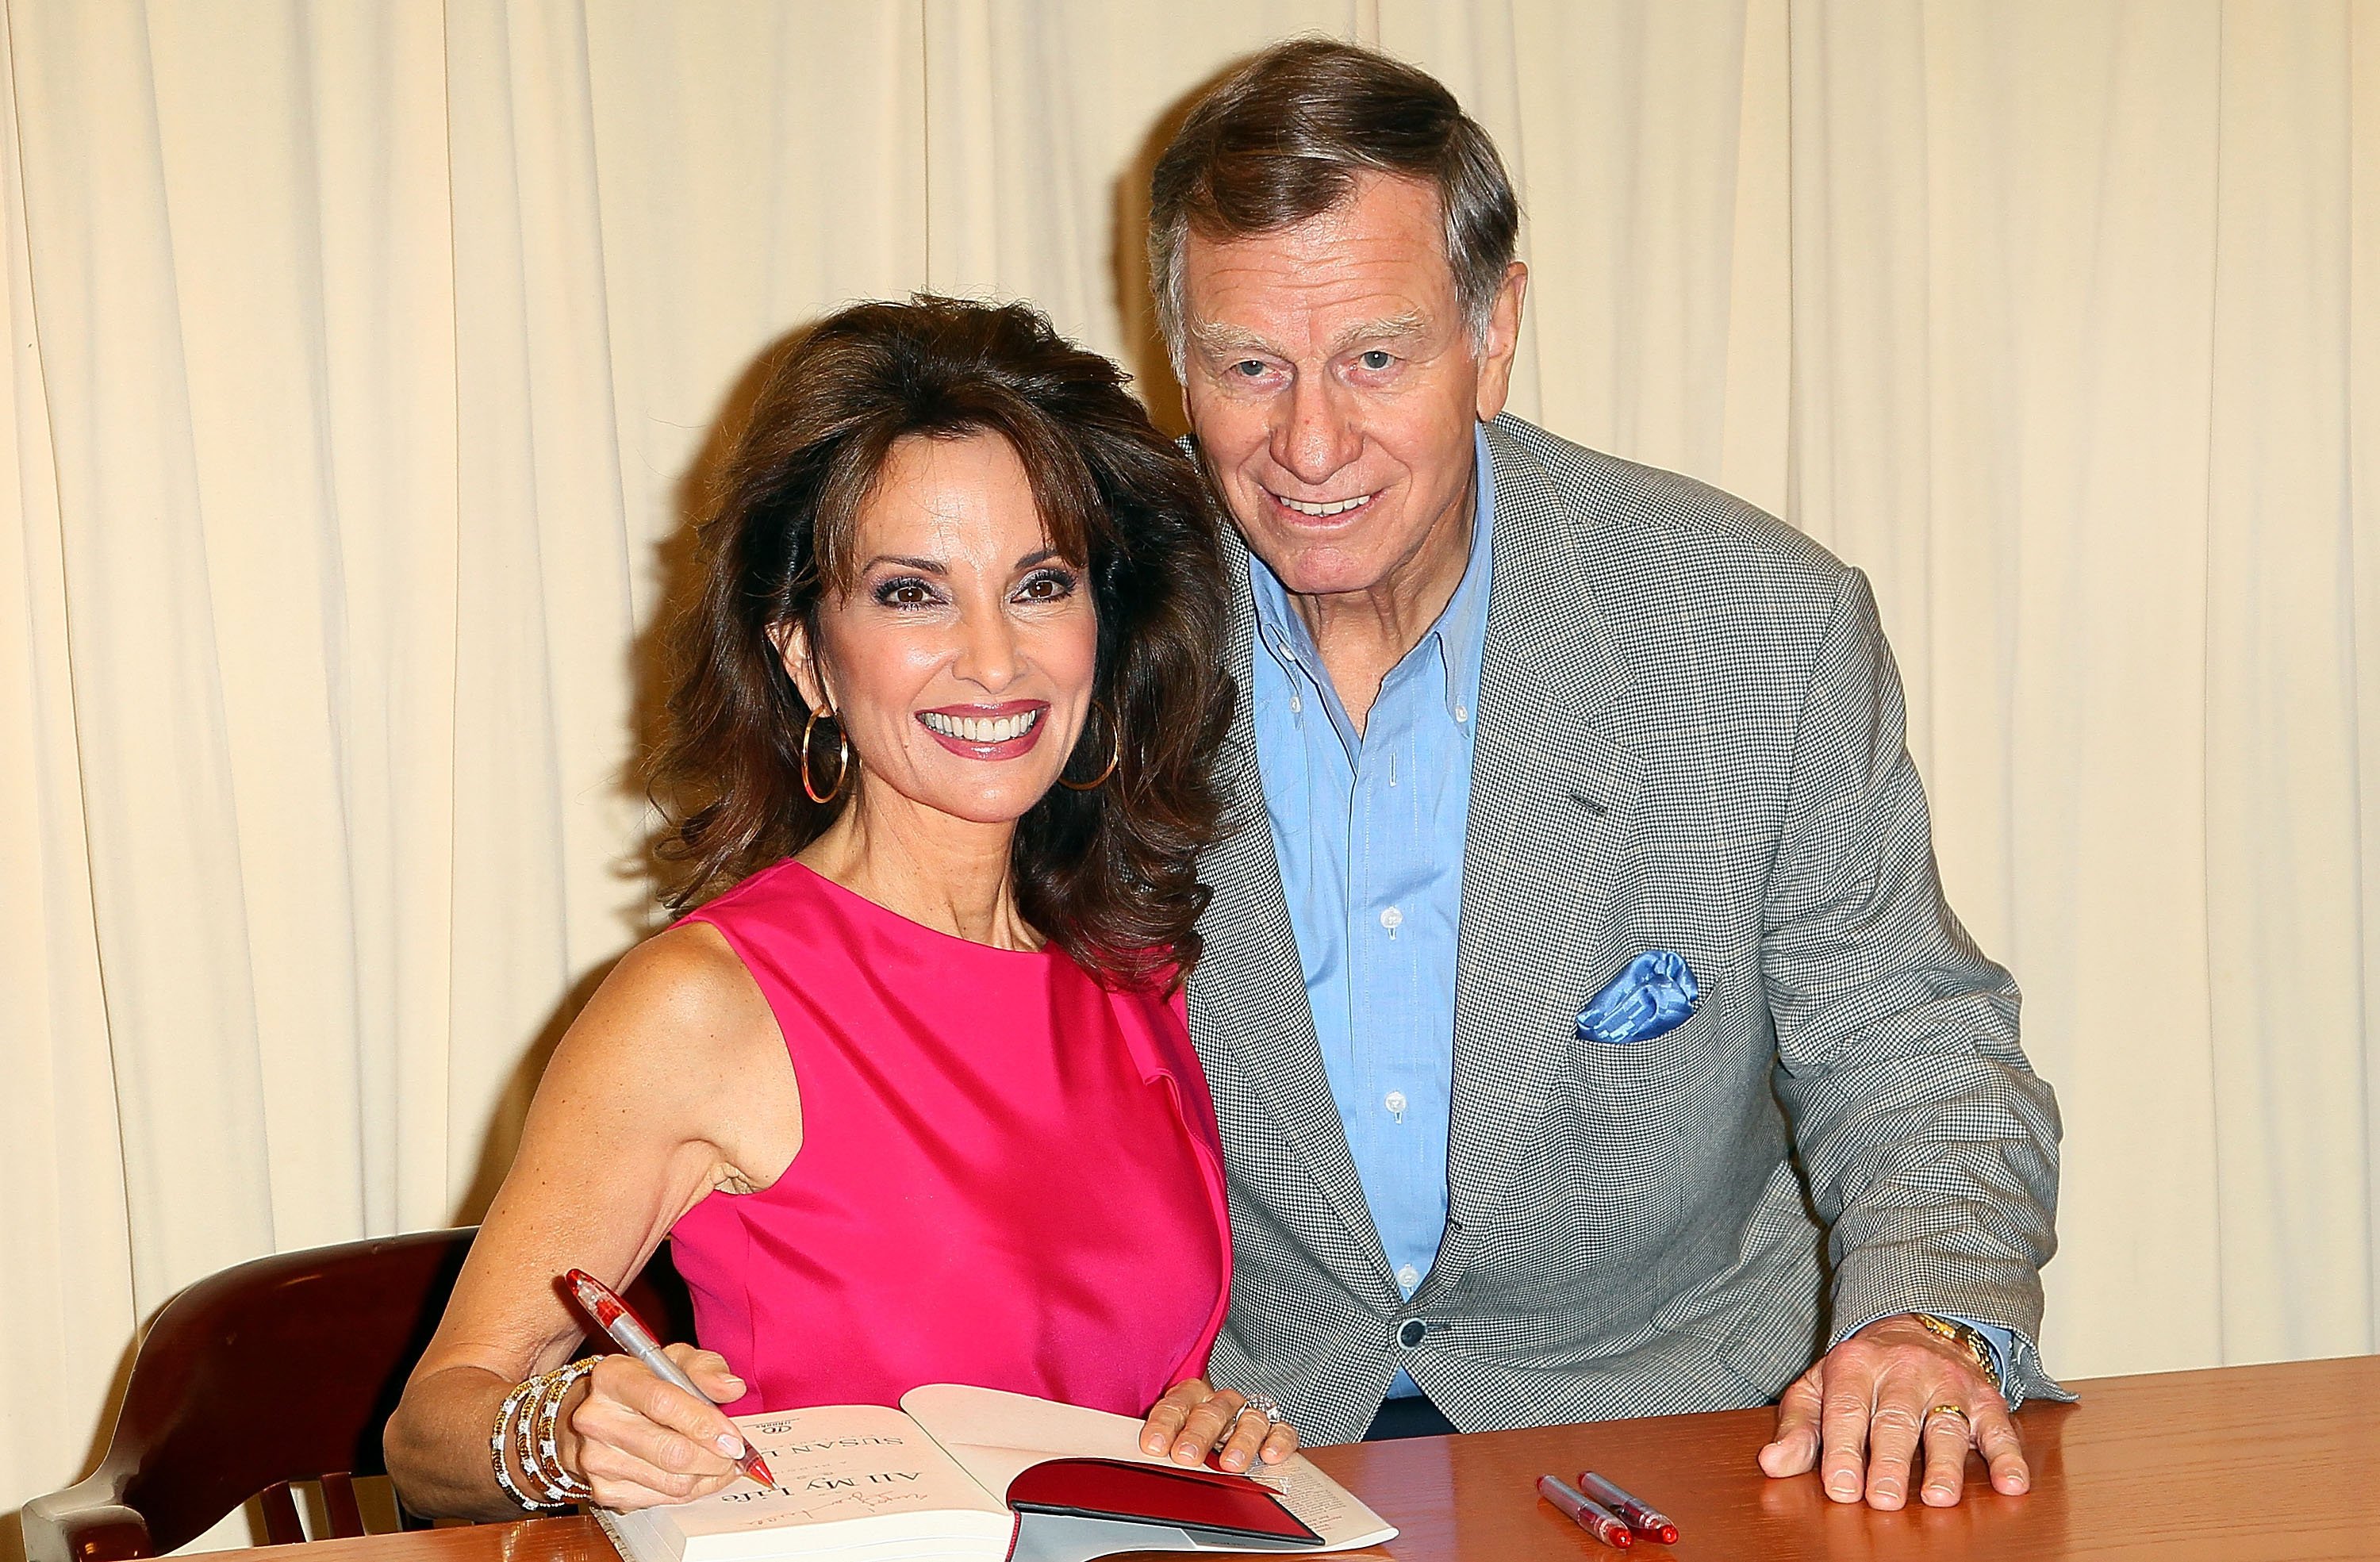 Susan Lucci and husband Helmut Huber during a 2011 book-signing event in New York. | Photo: Getty Images